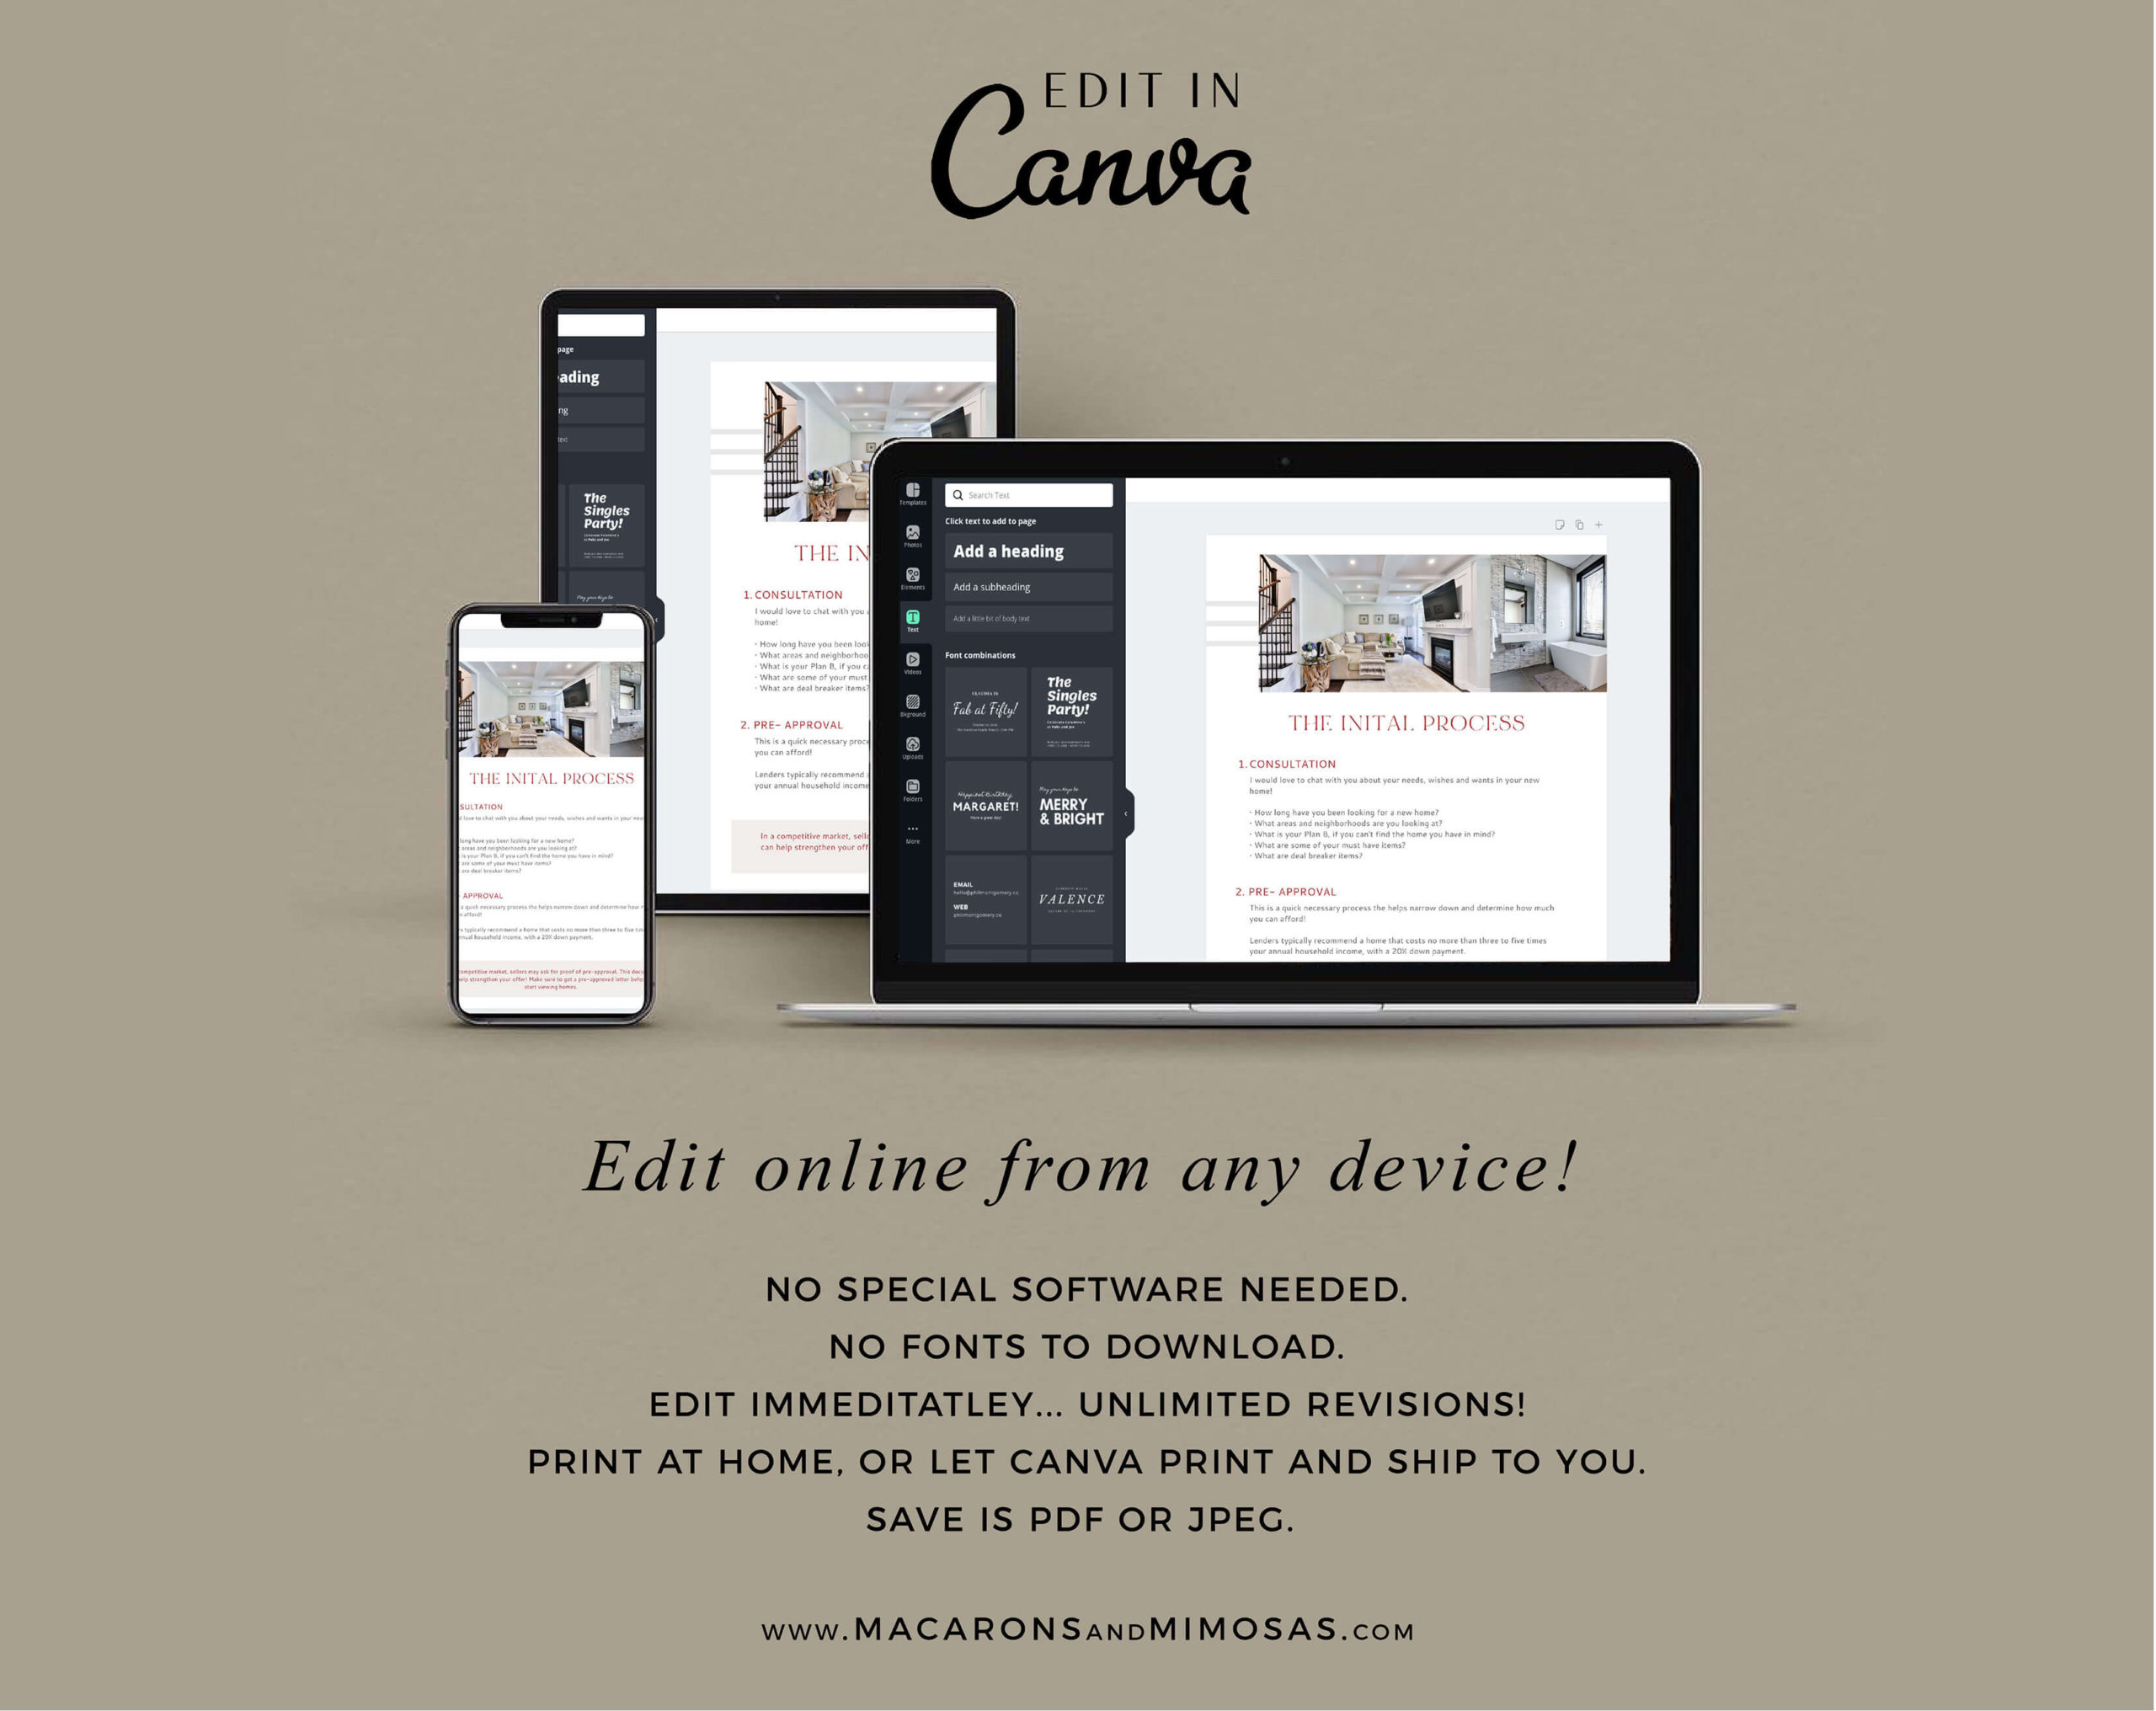 Buyers Guide Template, Real Estate Presentation Marketing Listing for Canva, 9 Page Buyer Home Packet with Questionnaire, House Buying Guide